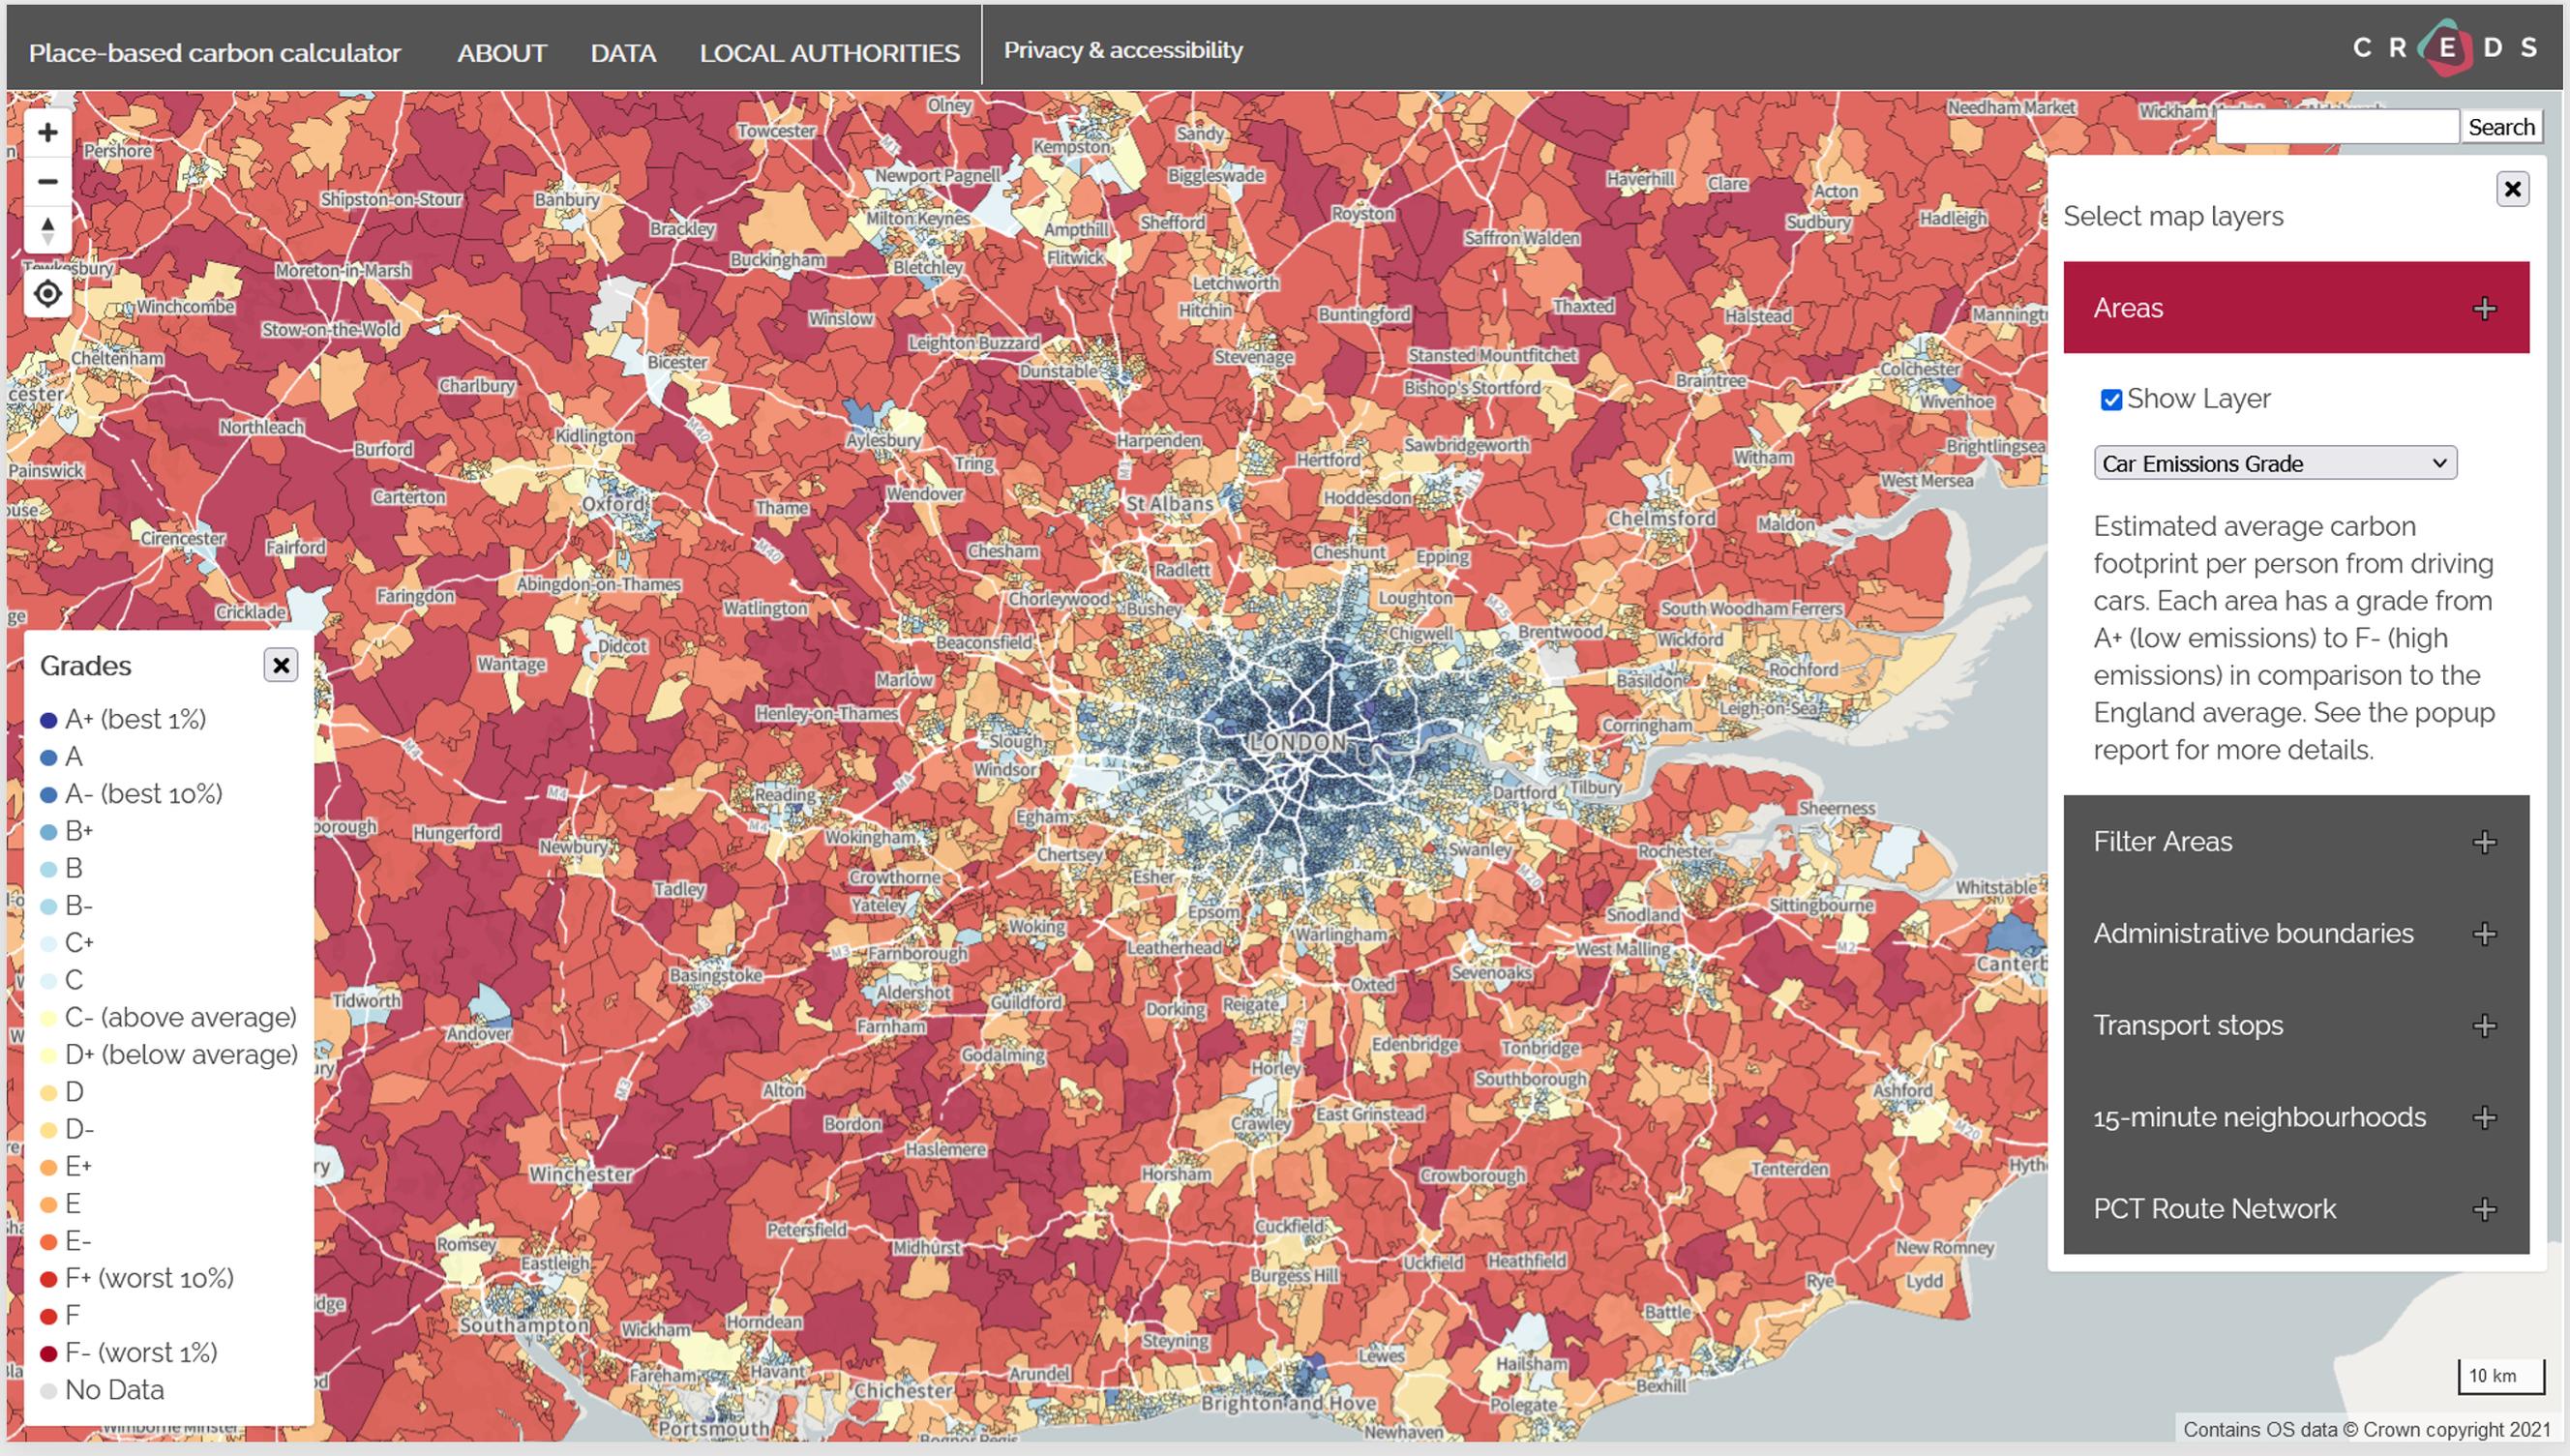 The Place-Based Carbon Calculator shows concentration of transport stops and service frequency